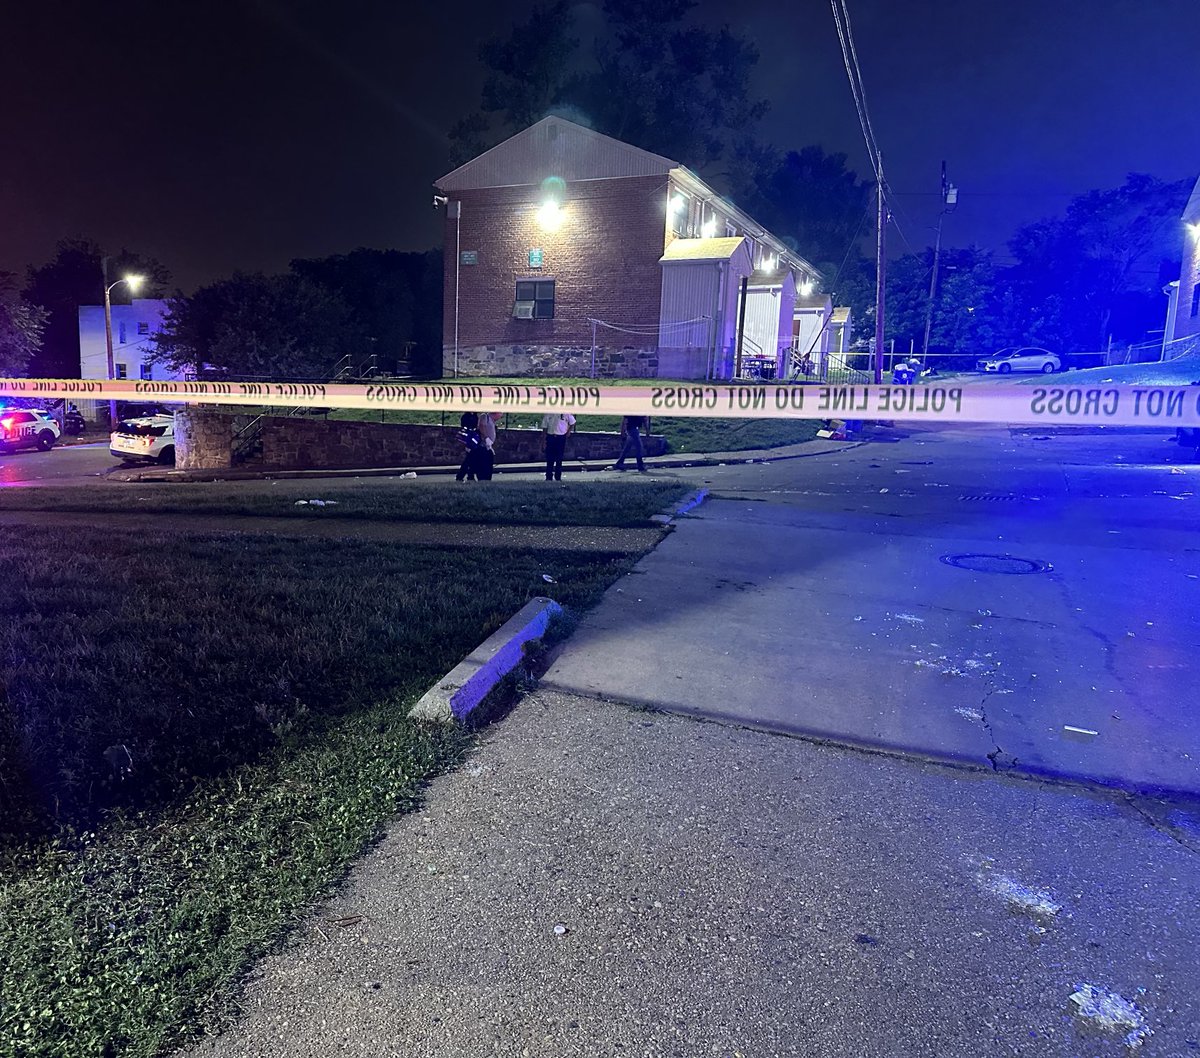 BPD is on scene of a masa shooting incident in the 800 blk of Gretna Court in our Southern District. Acting Commissioner Worley and PIO are on scene. Media Staging Area will be located at the intersection of 6th Street and Audrey Avenue